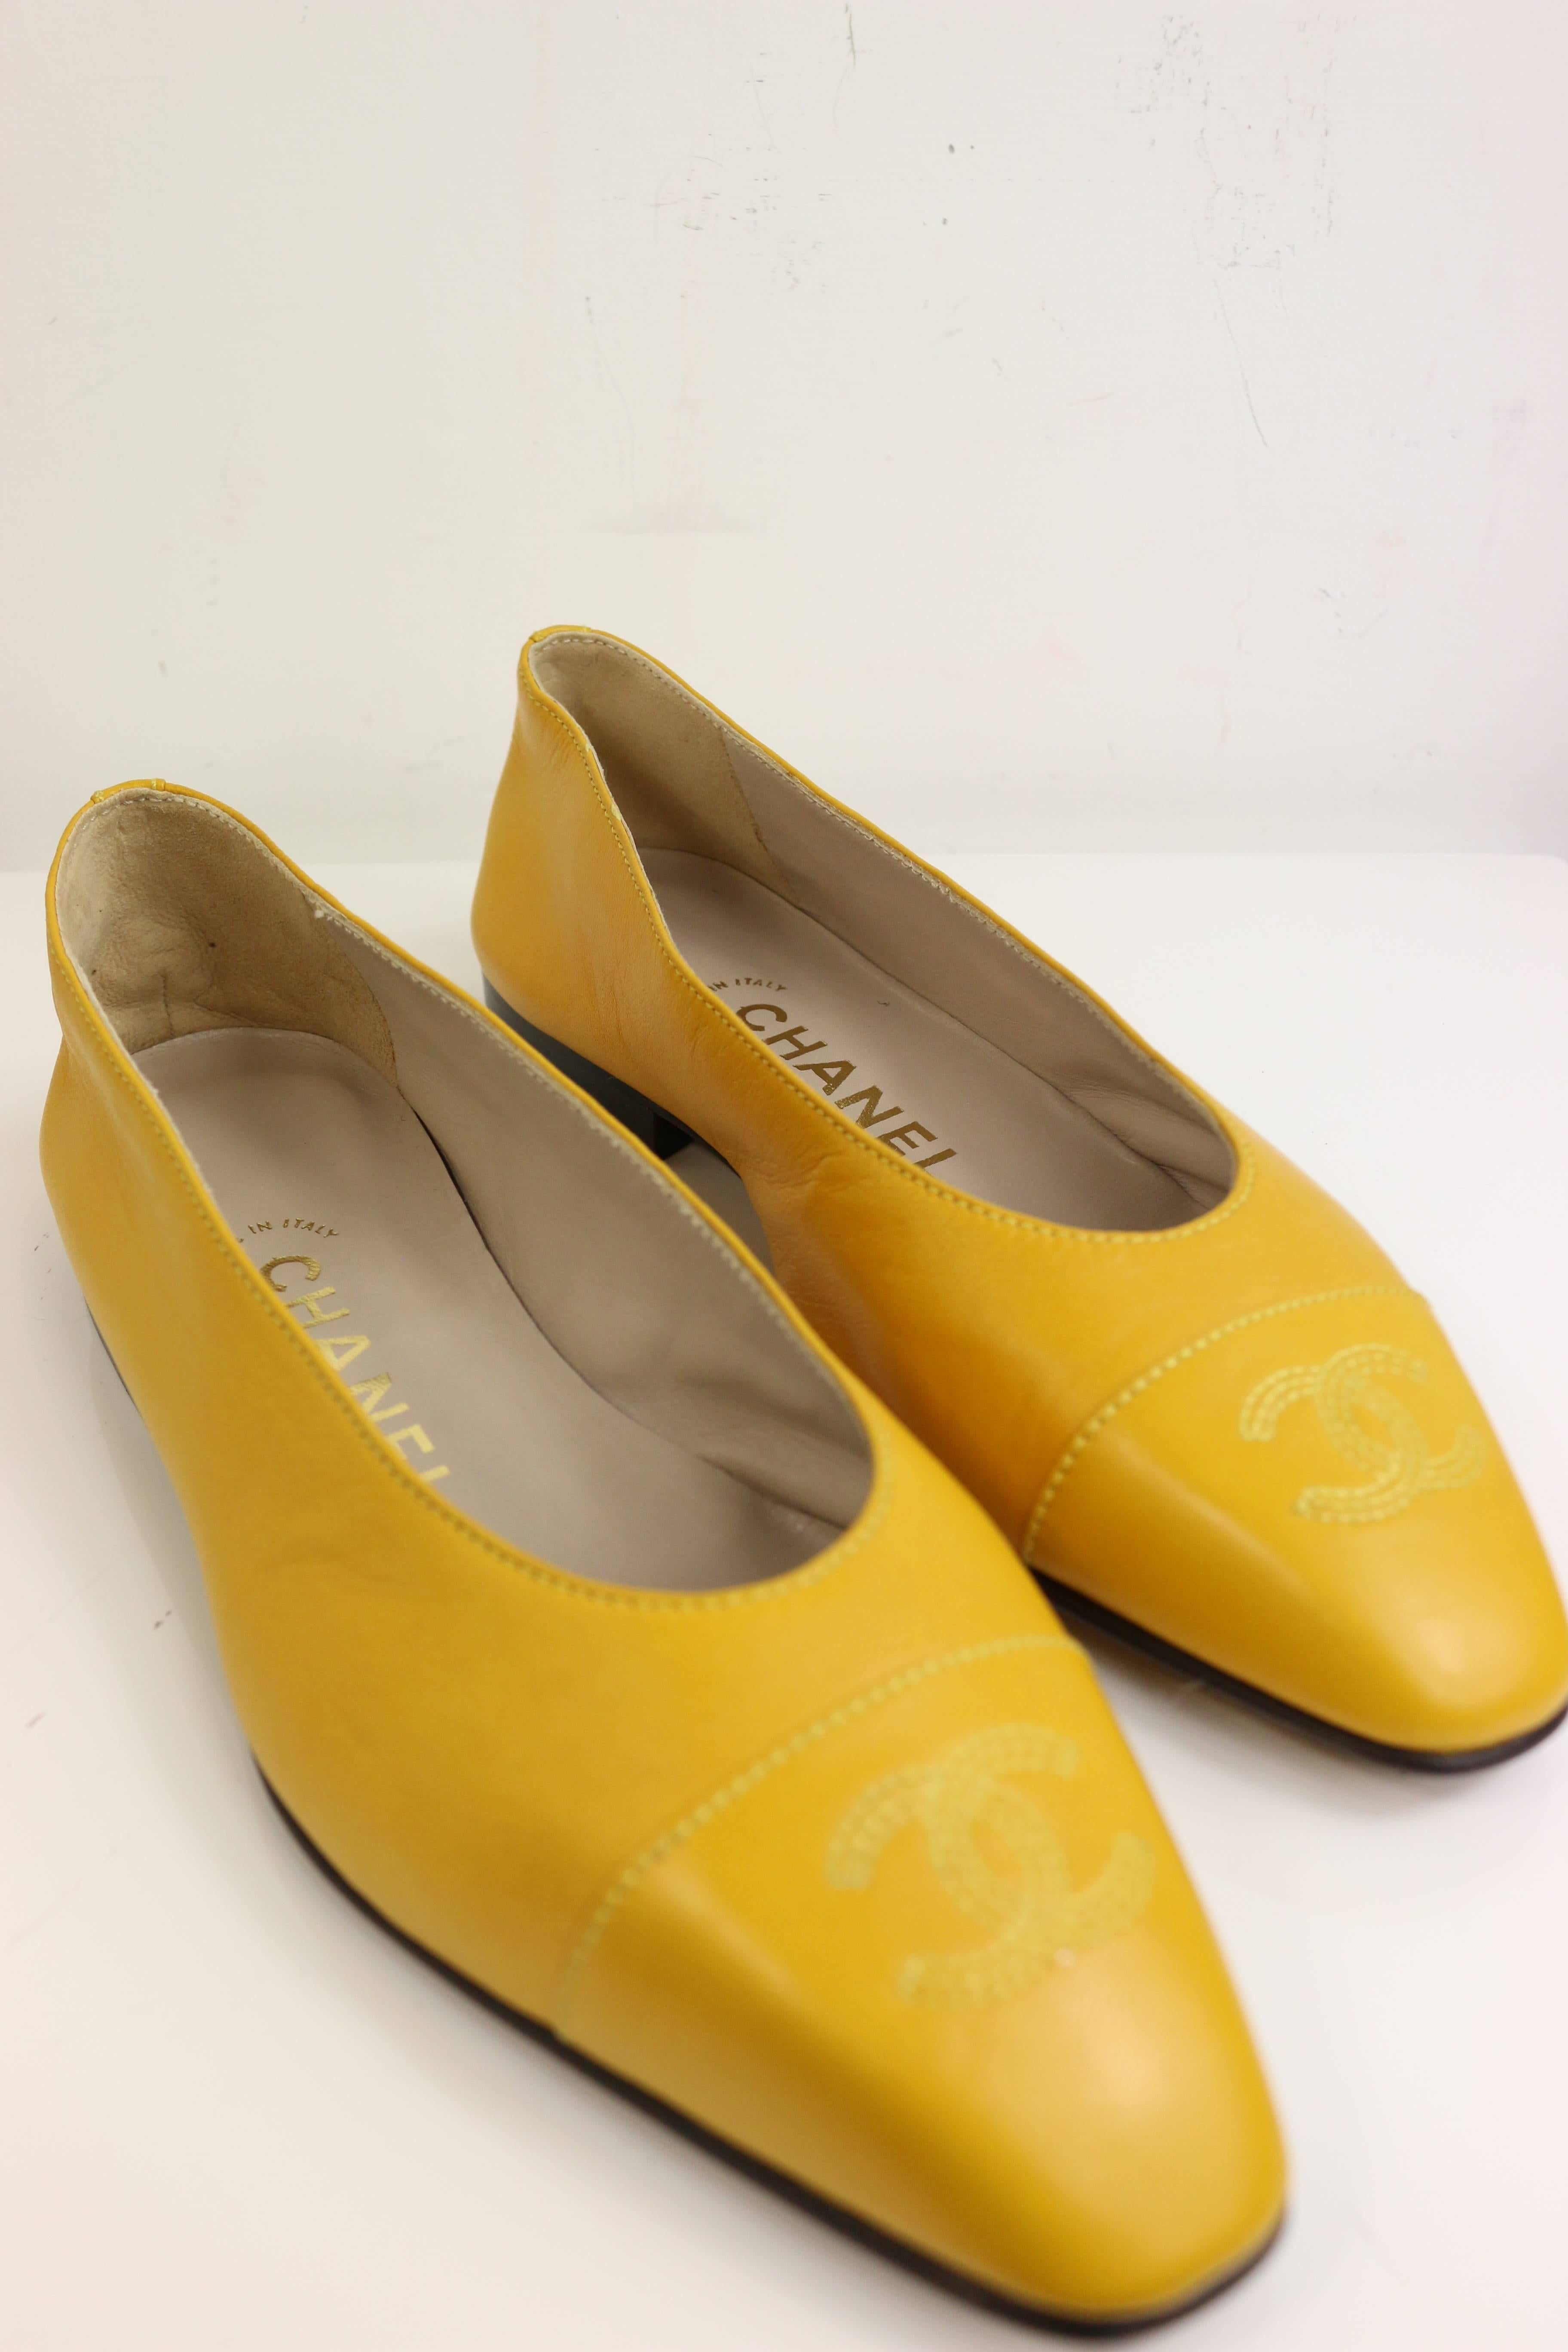 - Vintage Chanel yellow leather flats with 